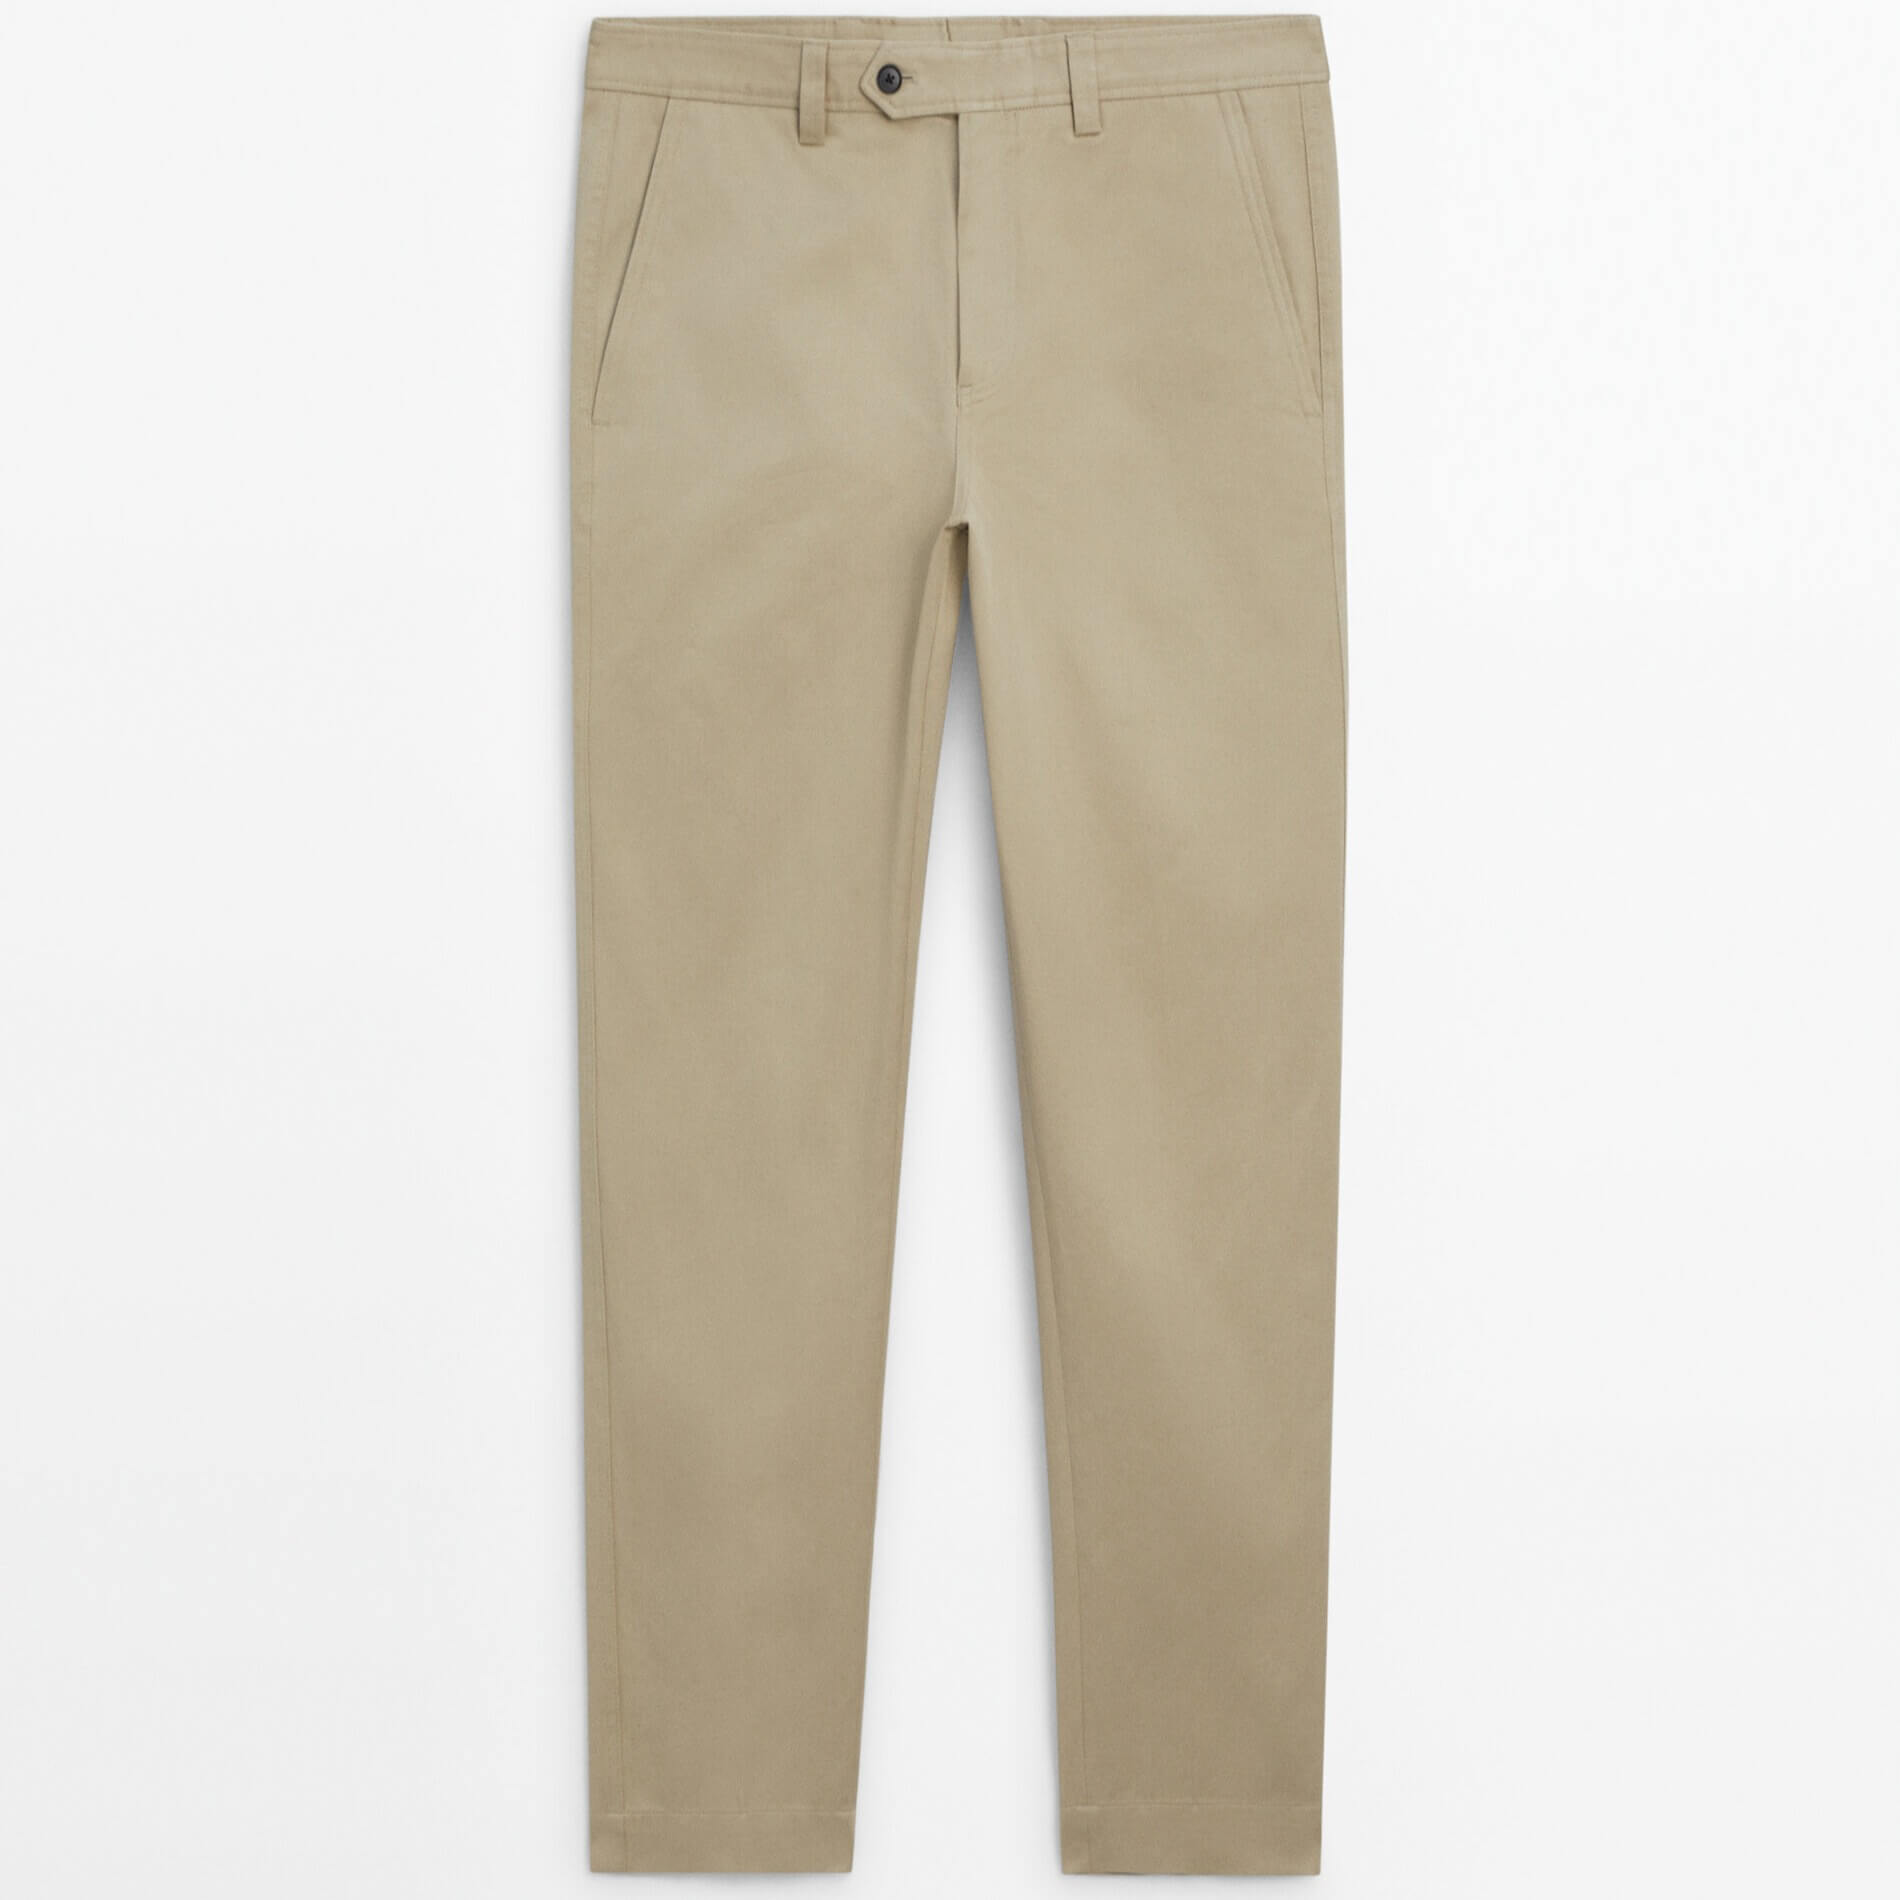 Брюки Massimo Dutti Relaxed Fit Belted Chino, бежевый брюки чинос massimo dutti relaxed fit wool limited edition тёмно синий размер s